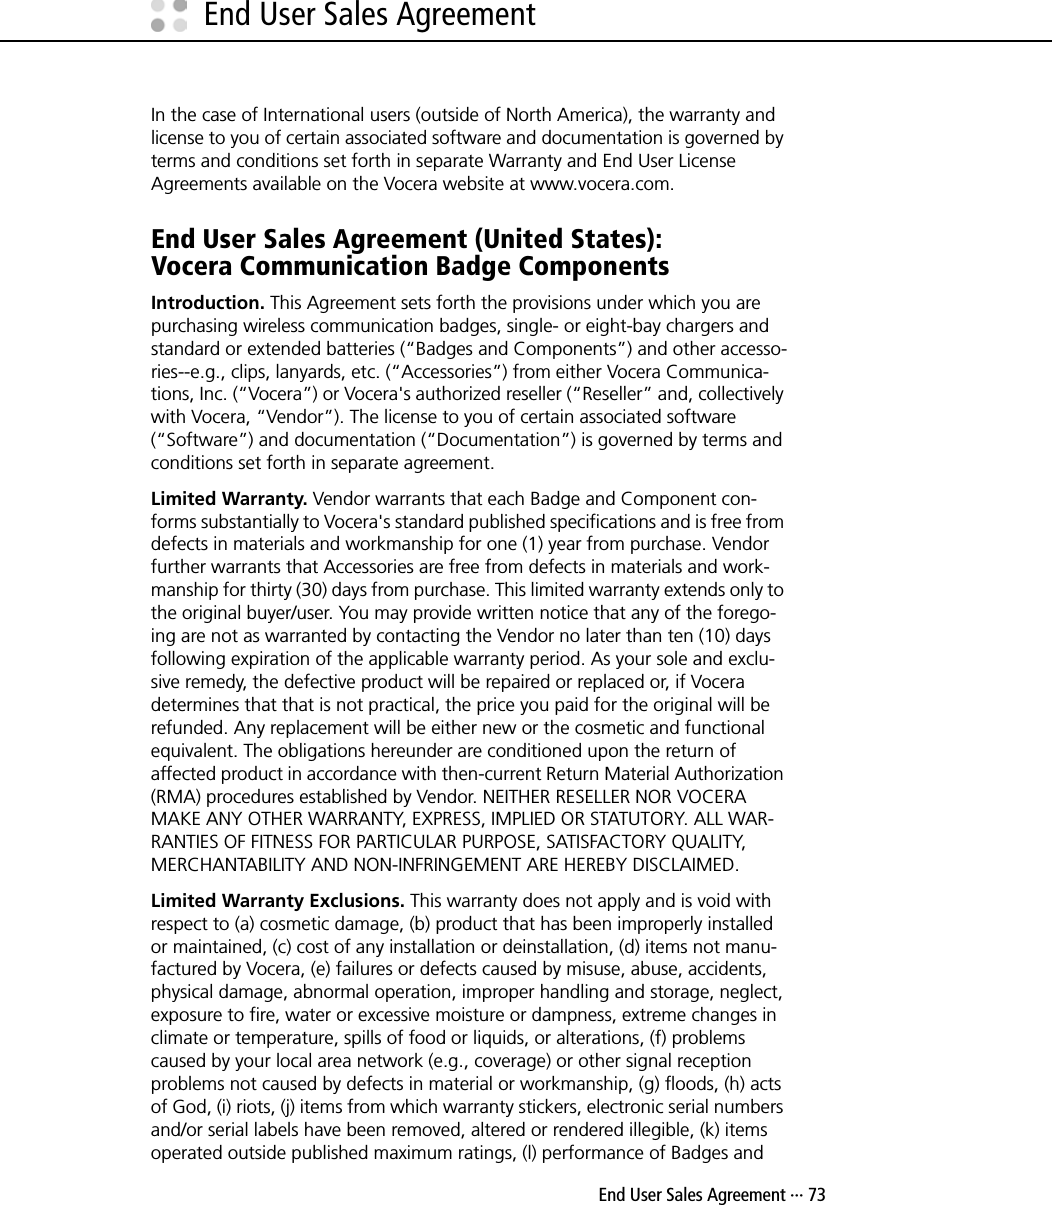  End User Sales Agreement ··· 73End User Sales AgreementIn the case of International users (outside of North America), the warranty and license to you of certain associated software and documentation is governed by terms and conditions set forth in separate Warranty and End User License Agreements available on the Vocera website at www.vocera.com.End User Sales Agreement (United States):Vocera Communication Badge ComponentsIntroduction. This Agreement sets forth the provisions under which you are purchasing wireless communication badges, single- or eight-bay chargers and standard or extended batteries (“Badges and Components”) and other accesso-ries--e.g., clips, lanyards, etc. (“Accessories”) from either Vocera Communica-tions, Inc. (“Vocera”) or Vocera&apos;s authorized reseller (“Reseller” and, collectively with Vocera, “Vendor”). The license to you of certain associated software (“Software”) and documentation (“Documentation”) is governed by terms and conditions set forth in separate agreement.Limited Warranty. Vendor warrants that each Badge and Component con-forms substantially to Vocera&apos;s standard published specifications and is free from defects in materials and workmanship for one (1) year from purchase. Vendor further warrants that Accessories are free from defects in materials and work-manship for thirty (30) days from purchase. This limited warranty extends only to the original buyer/user. You may provide written notice that any of the forego-ing are not as warranted by contacting the Vendor no later than ten (10) days following expiration of the applicable warranty period. As your sole and exclu-sive remedy, the defective product will be repaired or replaced or, if Vocera determines that that is not practical, the price you paid for the original will be refunded. Any replacement will be either new or the cosmetic and functional equivalent. The obligations hereunder are conditioned upon the return of affected product in accordance with then-current Return Material Authorization (RMA) procedures established by Vendor. NEITHER RESELLER NOR VOCERA MAKE ANY OTHER WARRANTY, EXPRESS, IMPLIED OR STATUTORY. ALL WAR-RANTIES OF FITNESS FOR PARTICULAR PURPOSE, SATISFACTORY QUALITY, MERCHANTABILITY AND NON-INFRINGEMENT ARE HEREBY DISCLAIMED.Limited Warranty Exclusions. This warranty does not apply and is void with respect to (a) cosmetic damage, (b) product that has been improperly installed or maintained, (c) cost of any installation or deinstallation, (d) items not manu-factured by Vocera, (e) failures or defects caused by misuse, abuse, accidents, physical damage, abnormal operation, improper handling and storage, neglect, exposure to fire, water or excessive moisture or dampness, extreme changes in climate or temperature, spills of food or liquids, or alterations, (f) problems caused by your local area network (e.g., coverage) or other signal reception problems not caused by defects in material or workmanship, (g) floods, (h) acts of God, (i) riots, (j) items from which warranty stickers, electronic serial numbers and/or serial labels have been removed, altered or rendered illegible, (k) items operated outside published maximum ratings, (l) performance of Badges and 